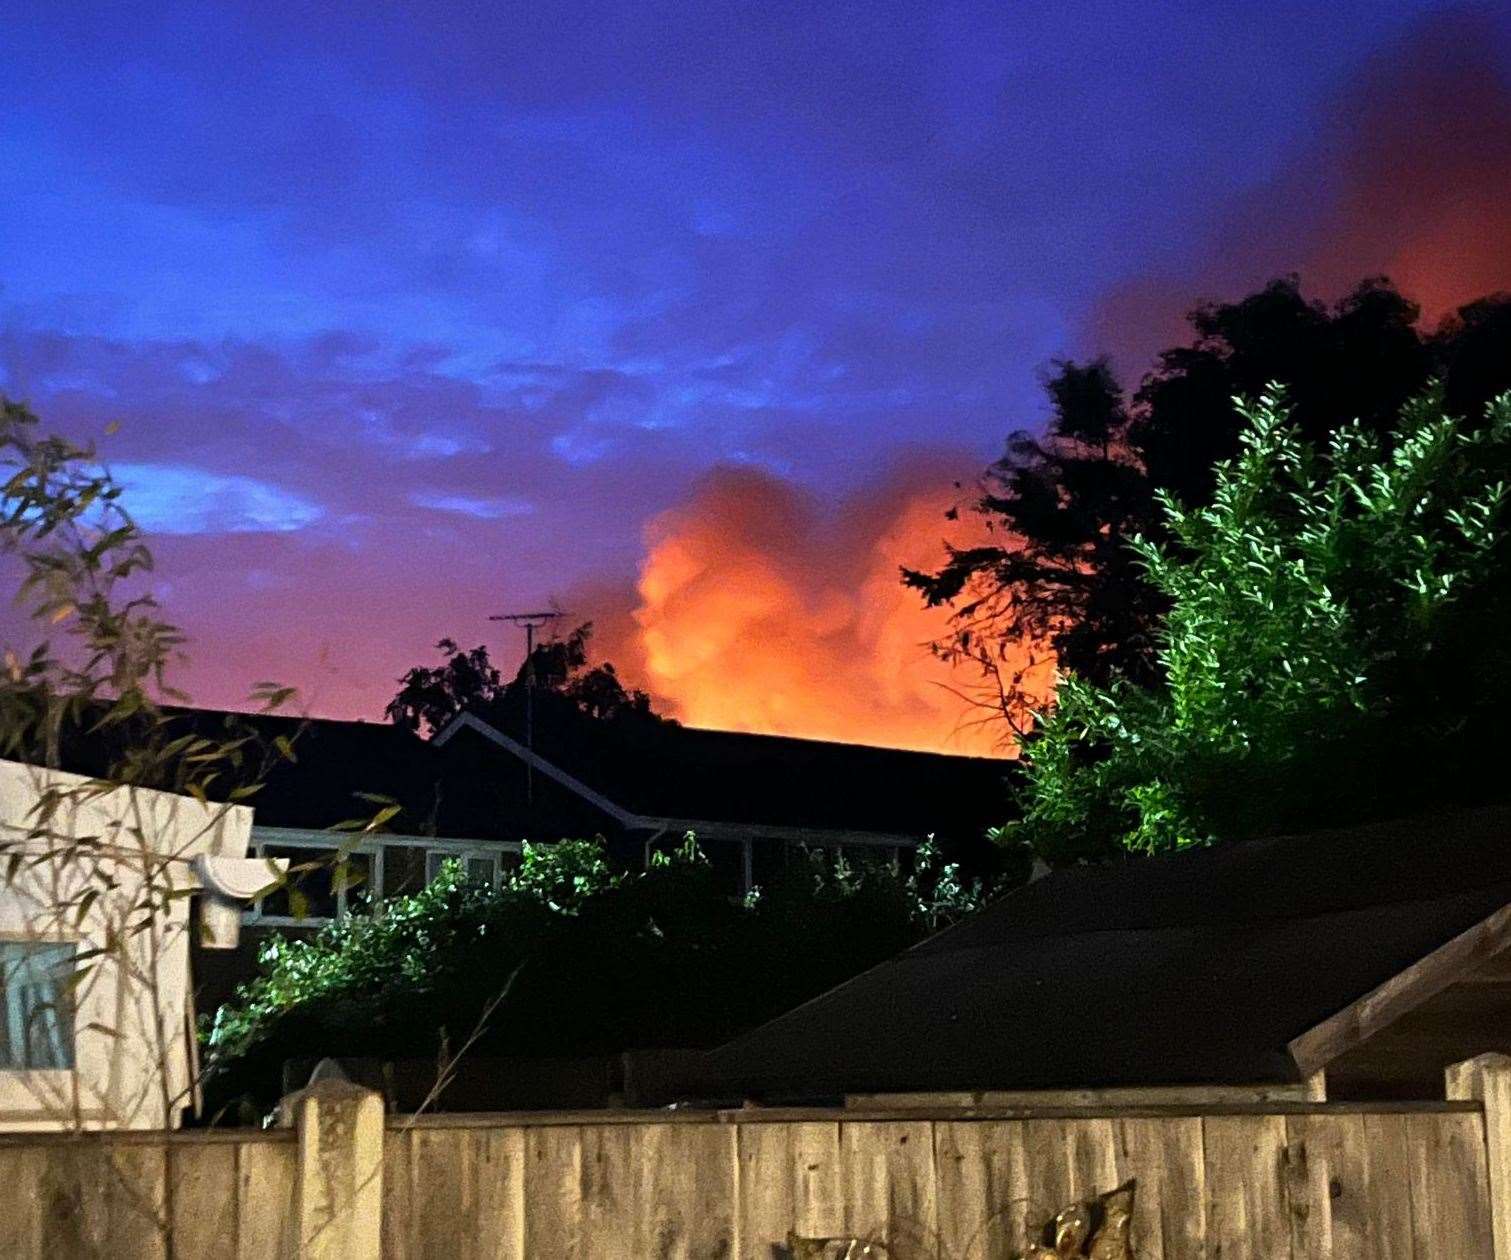 The blaze can be seen from a residential property in Boughton. Picture: Leah Stanger